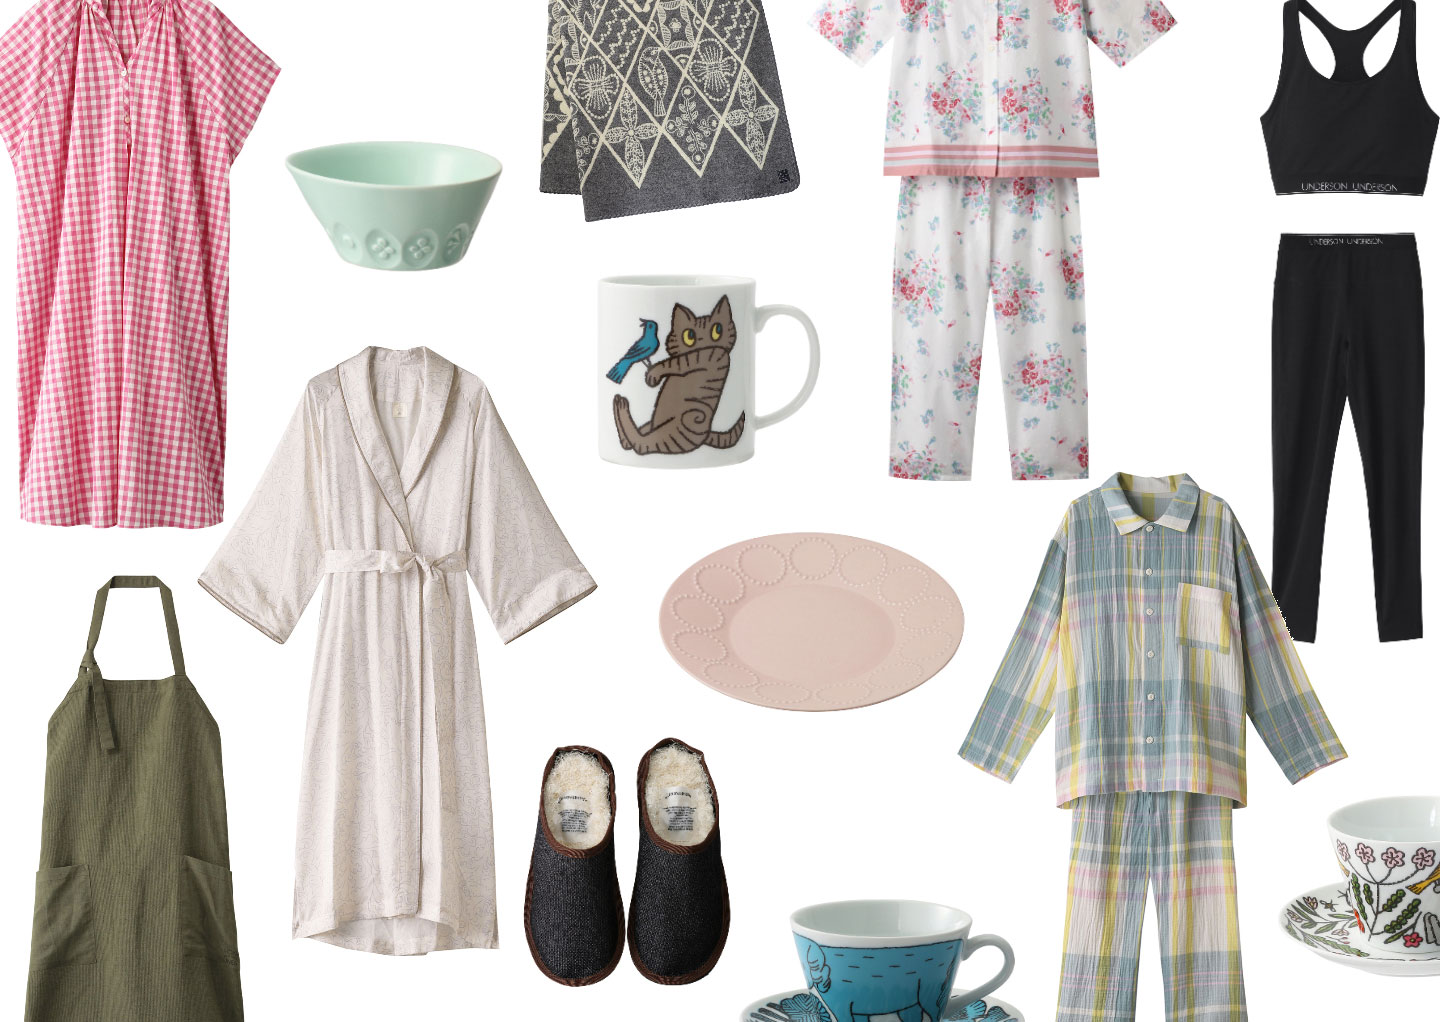 ELLE SHOP: Interior goods and loungewear by chic Japanese brands